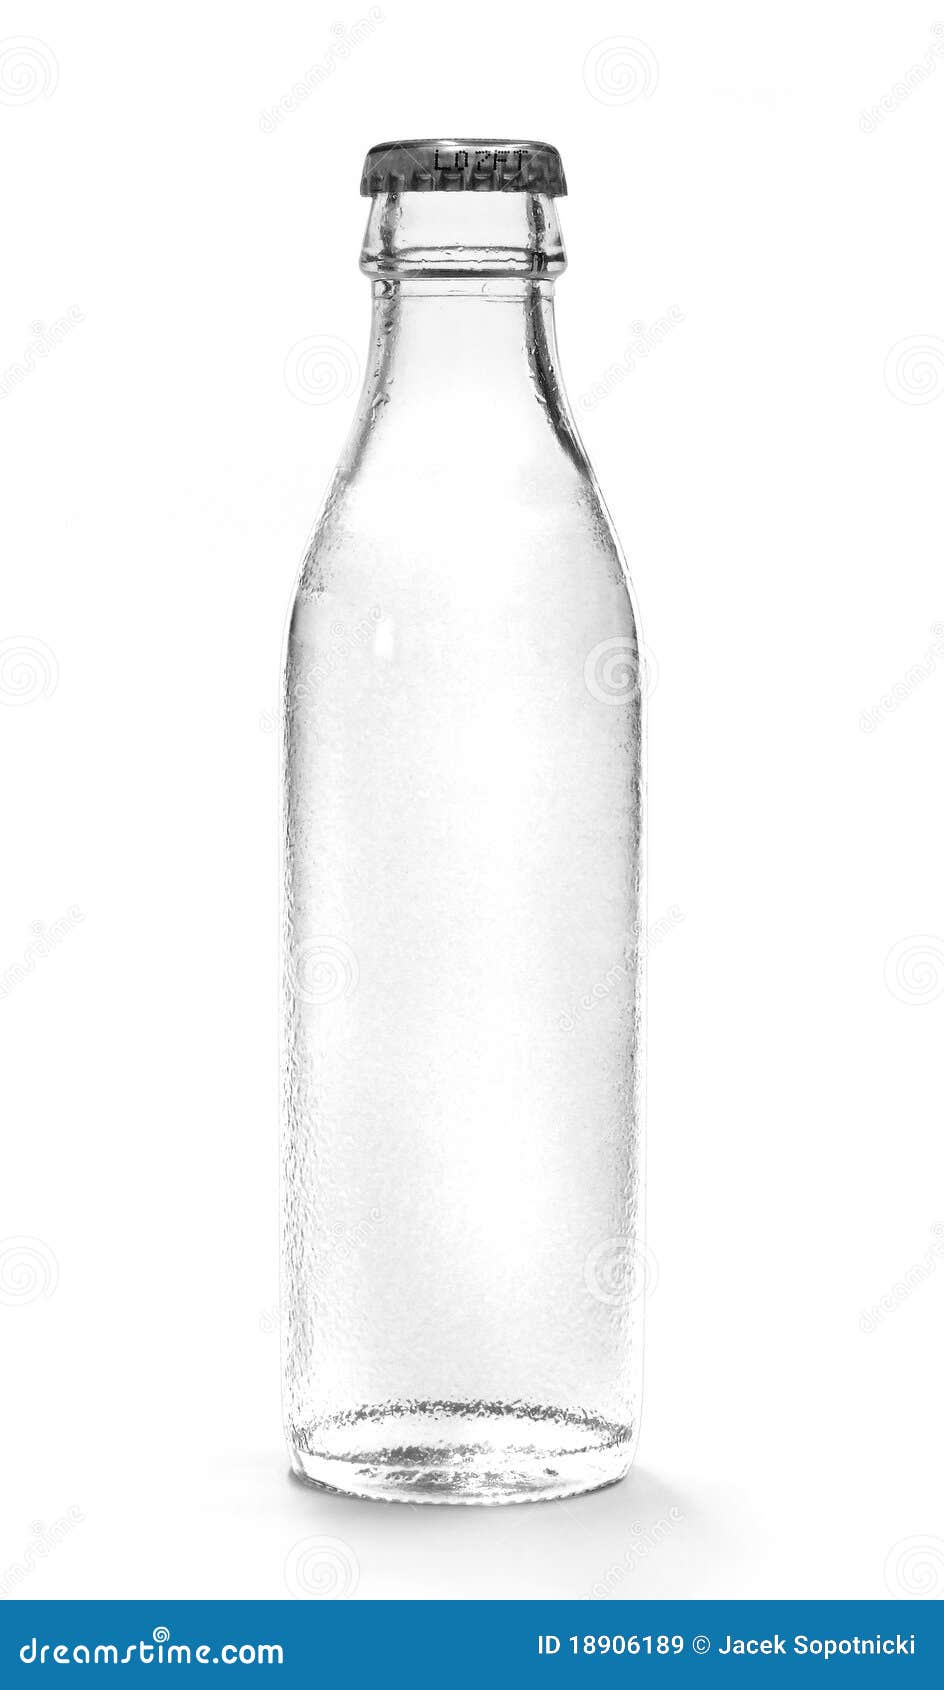 Clear glass bottle stock image. Image of isolated, white